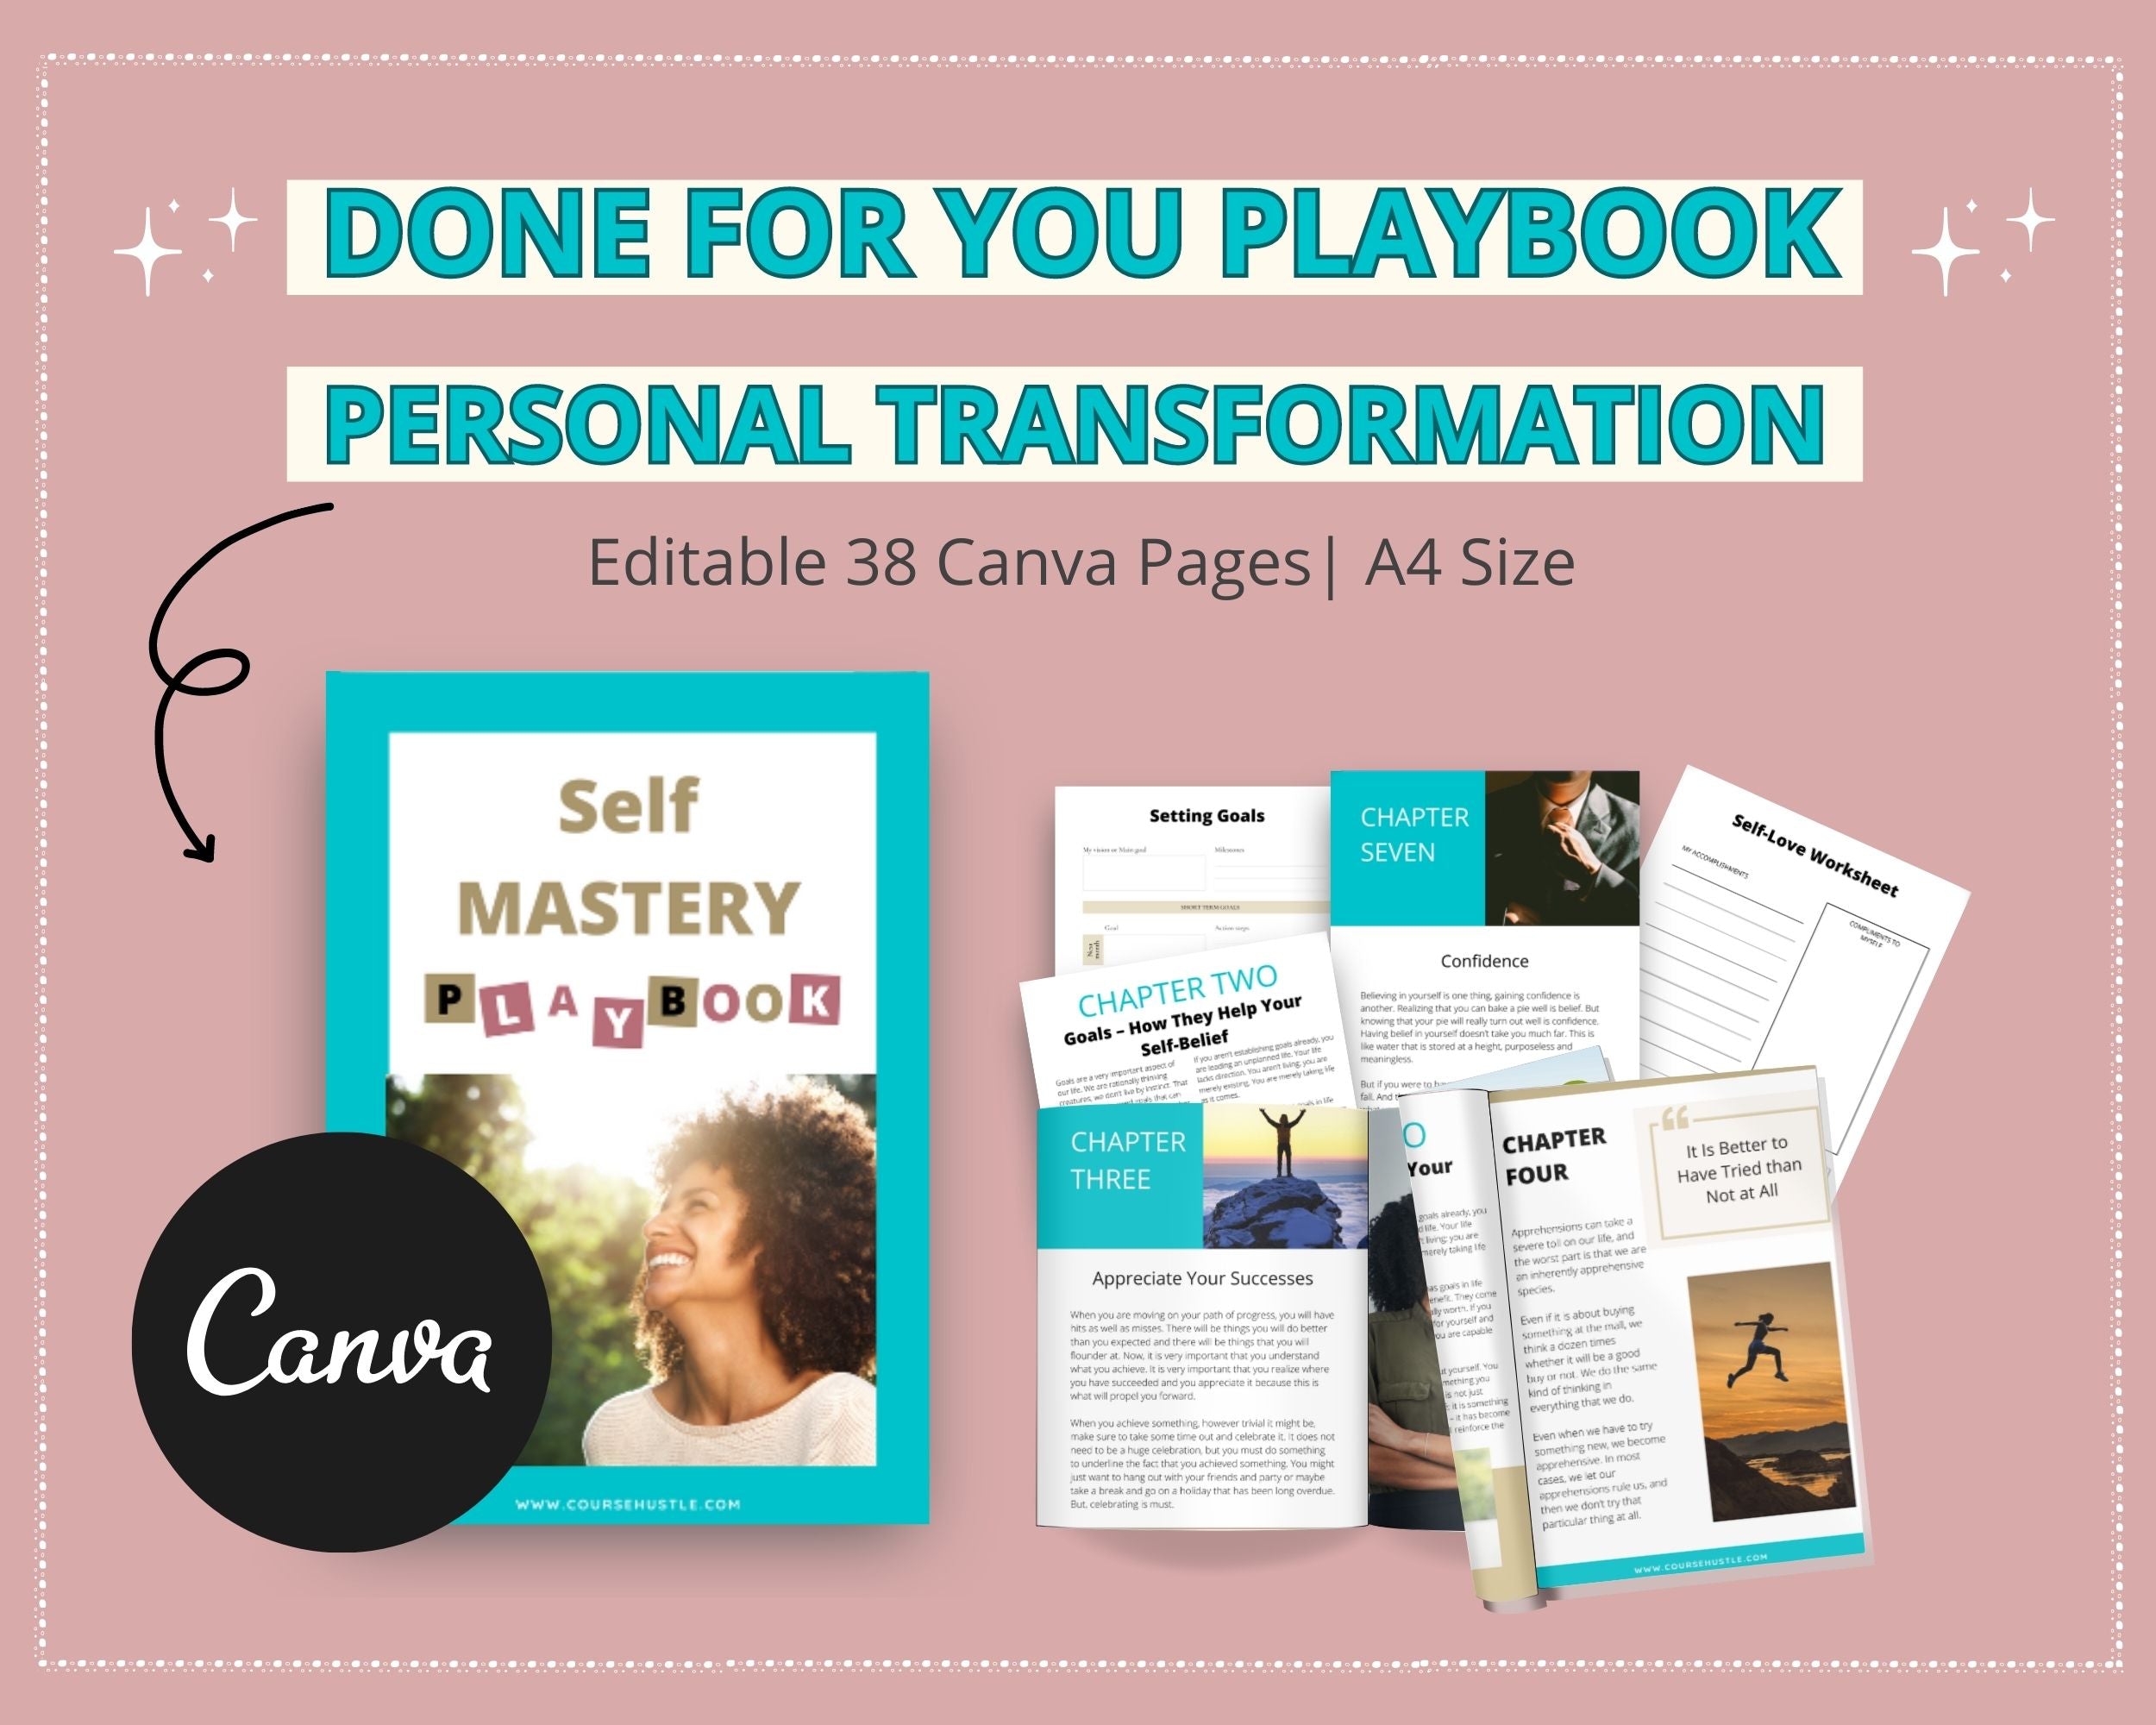 Done for You Self Mastery Playbook in Canva | Editable A4 Size Canva Template